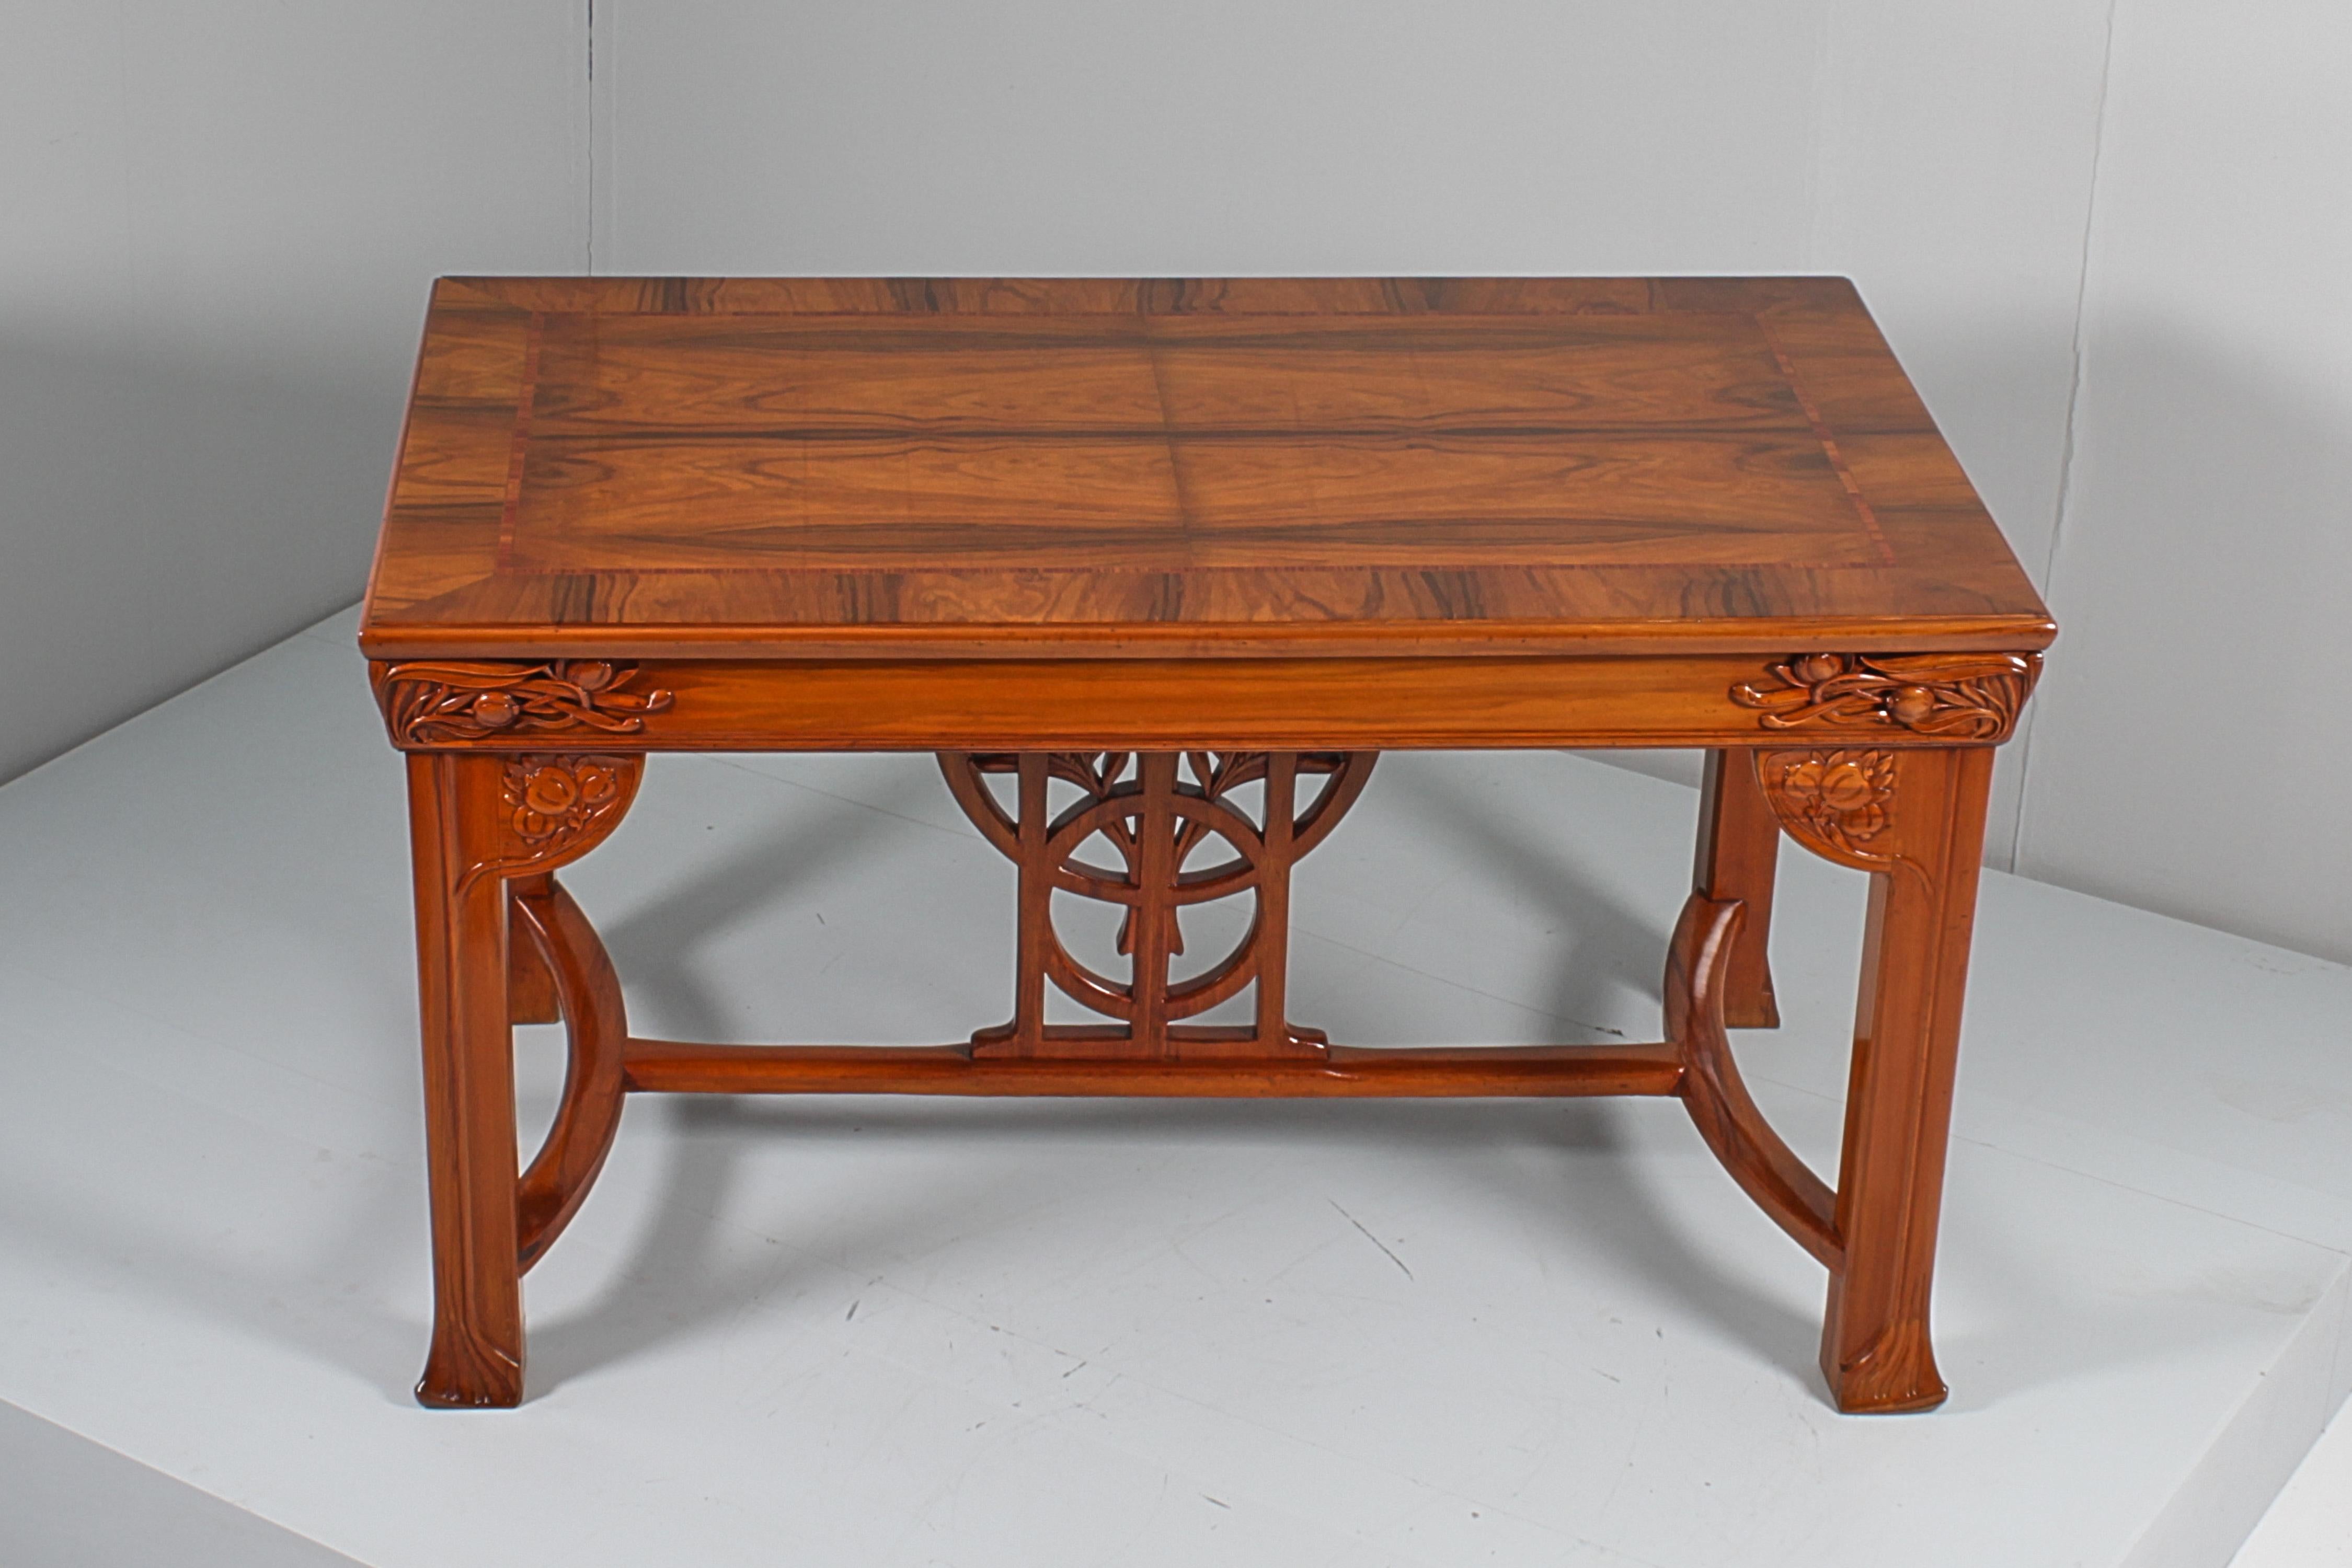 Art Nouveau V. Ducrot Restored Inlaid and Carved Wood Table 1900 Italy For Sale 3